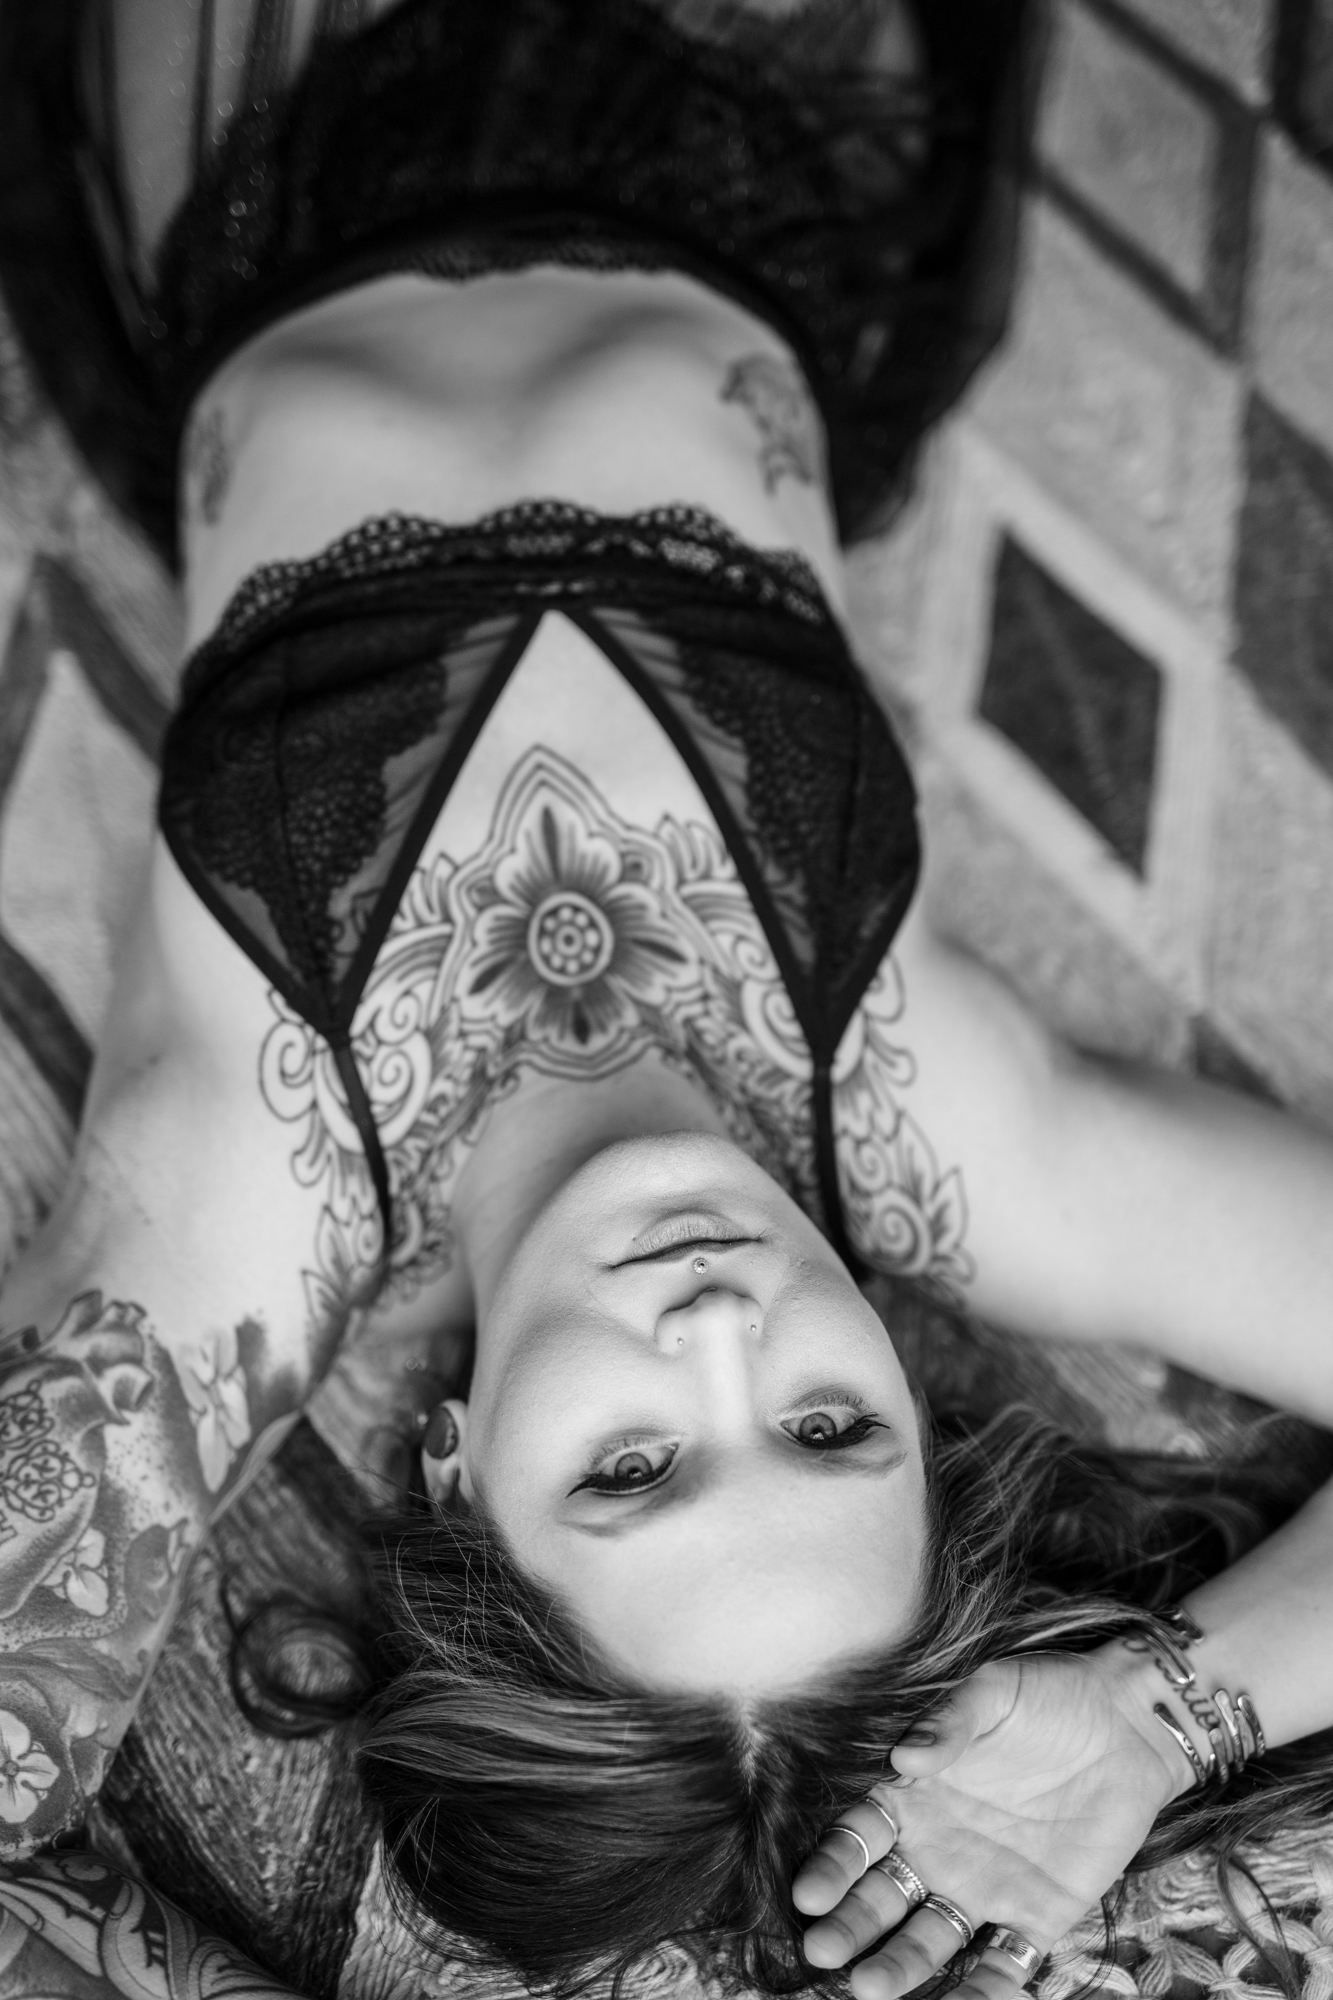 https://lilacandfernphotography.com/wp-content/uploads/2022/03/Boudoir-Fort-Collins-Colorado-Lilac-and-Fern-LS-31.jpg